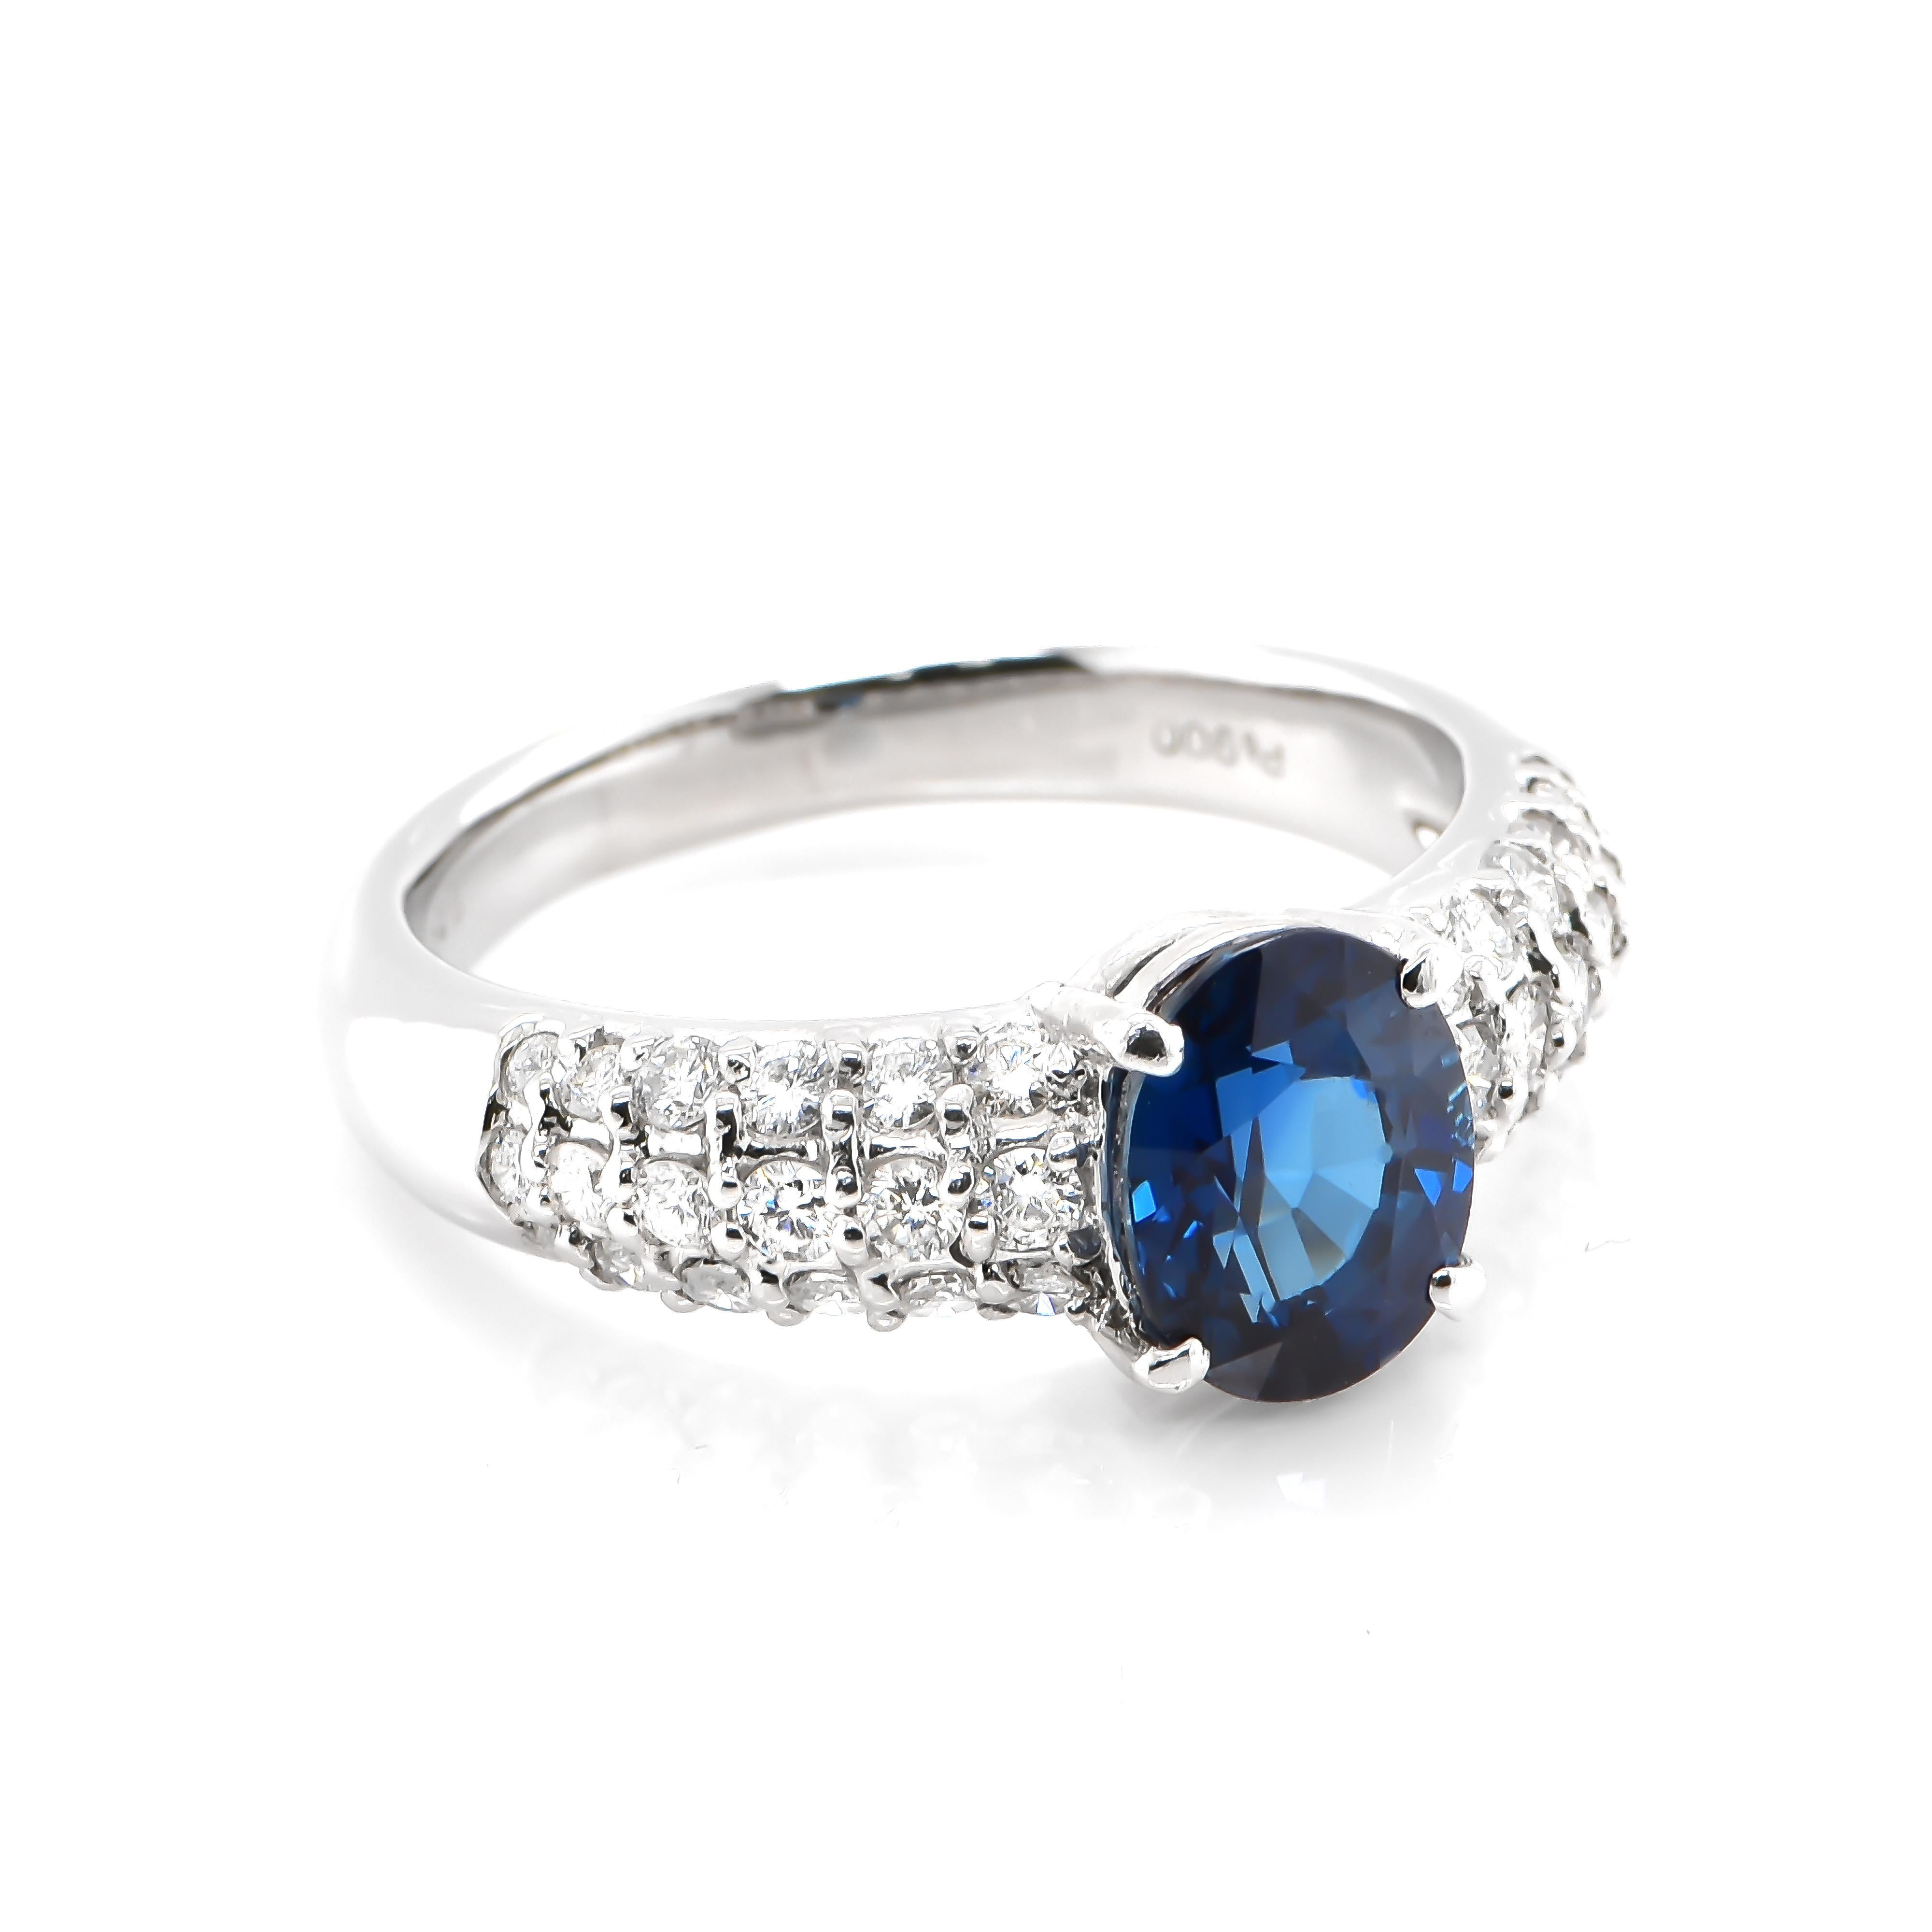 A beautiful ring featuring 2.25 Carat Natural Royal Blue Sapphire and 0.69 Carats Diamond Accents set in Platinum. Sapphires have extraordinary durability - they excel in hardness as well as toughness and durability making them very popular in